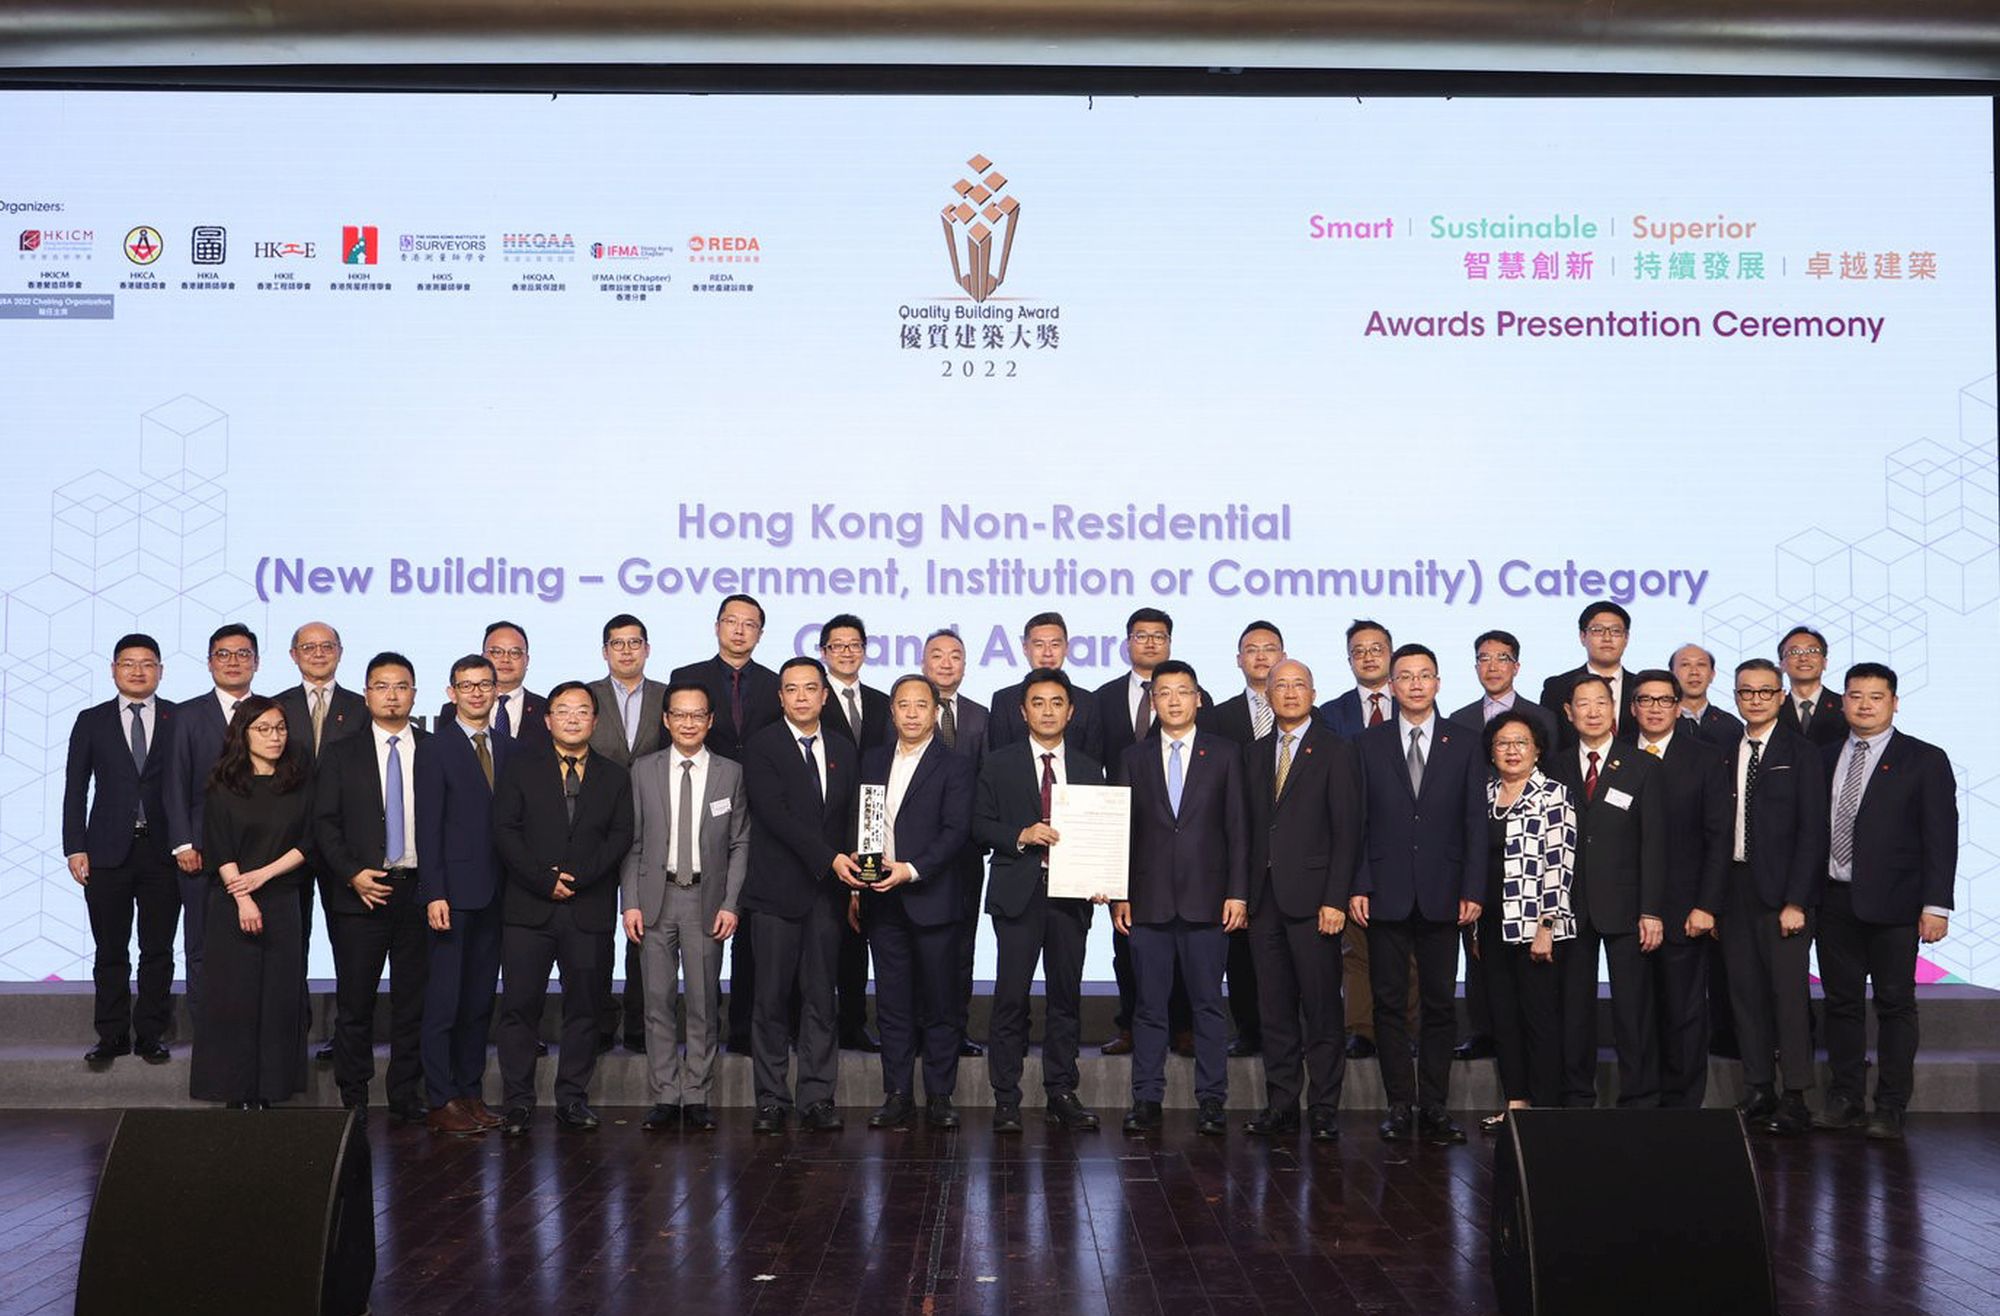 Award Presentation Ceremony of Quality Building Award 2022. North Lantau Hospital Hong Kong Infection Control Centre (HKICC) was awarded the Grand Award under the ‘Hong Kong Non-Residential (New Building – Government, Institution or Community)’ Category and the Innovative Project Award.